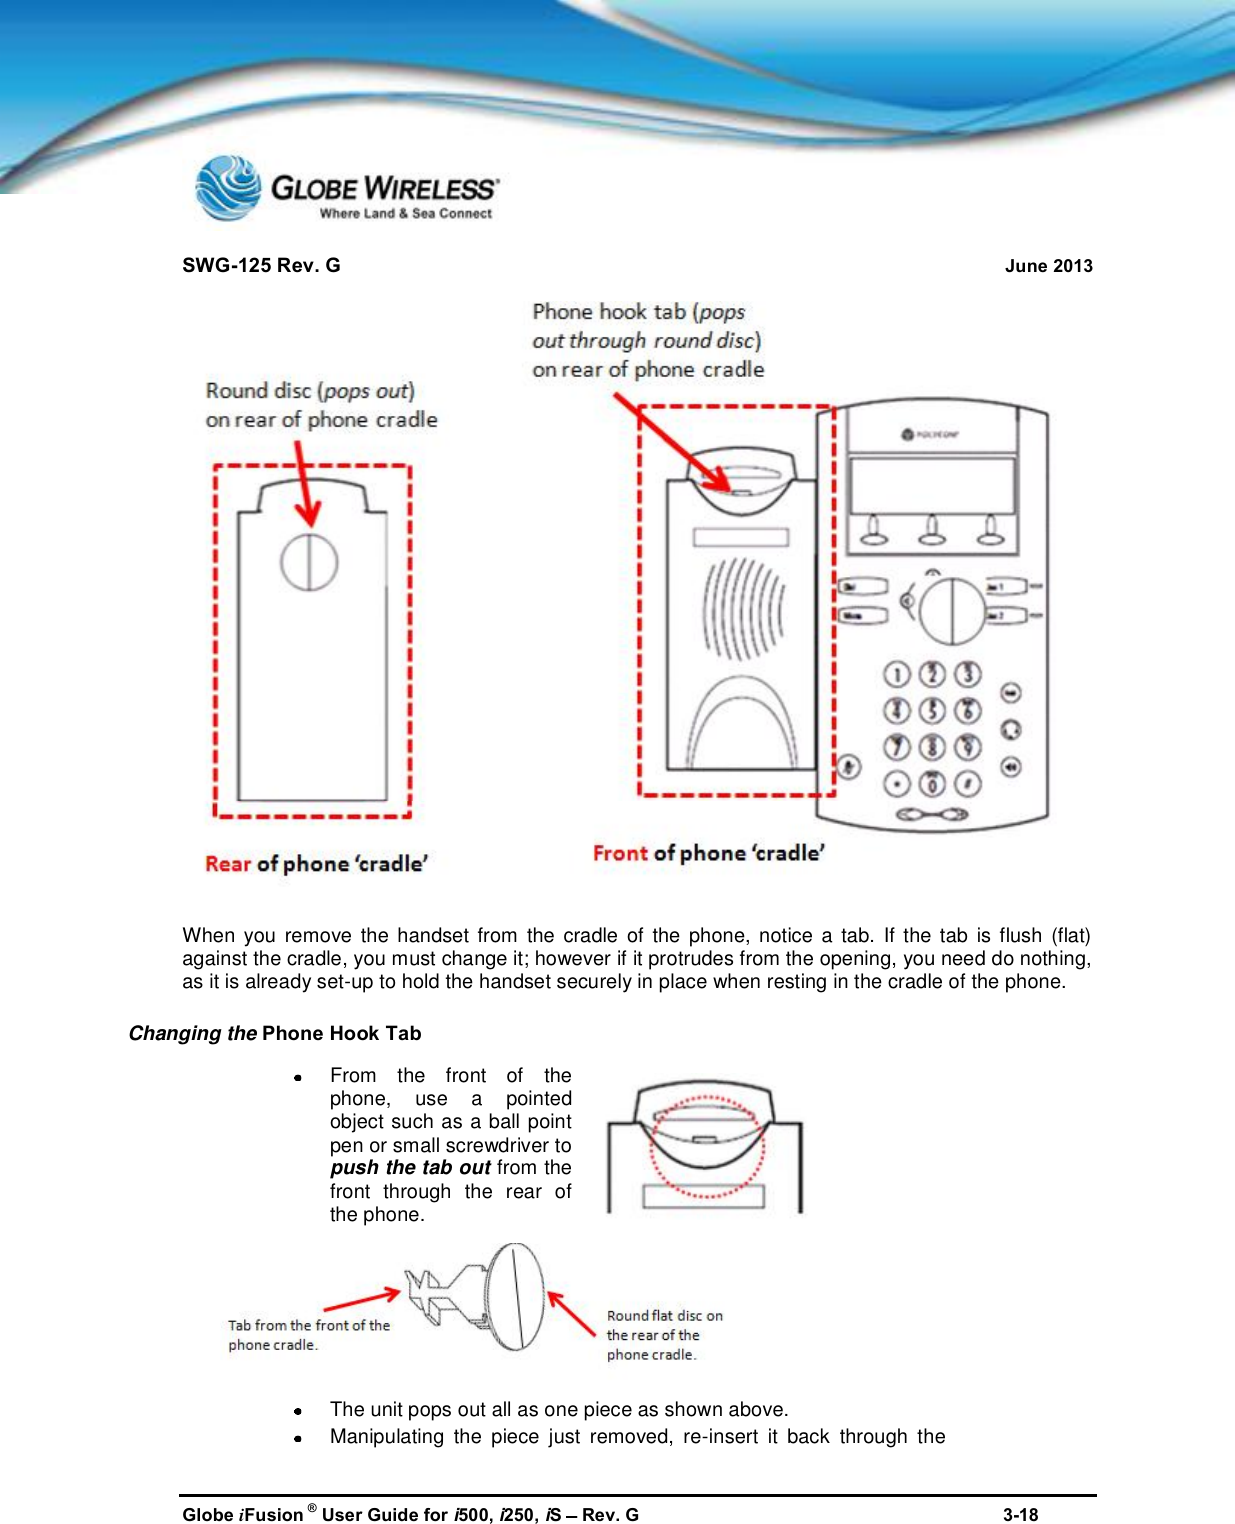 SWG-125 Rev. G June 2013Globe iFusion ®User Guide for i500, i250, iSRev. G 3-18When you remove the handset from the cradle of the phone, notice a tab. If the tab is flush (flat)against the cradle, you must change it; however if it protrudes from the opening, you need do nothing,as it is already set-up to hold the handset securely in place when resting in the cradle of the phone.Changing the Phone Hook TabFrom the front of thephone,use a pointedobject such as a ball pointpen or small screwdriver topush the tab outfrom thefront through the rear ofthe phone.The unit pops out all as one piece as shown above.Manipulating the piece just removed, re-insert it back through the